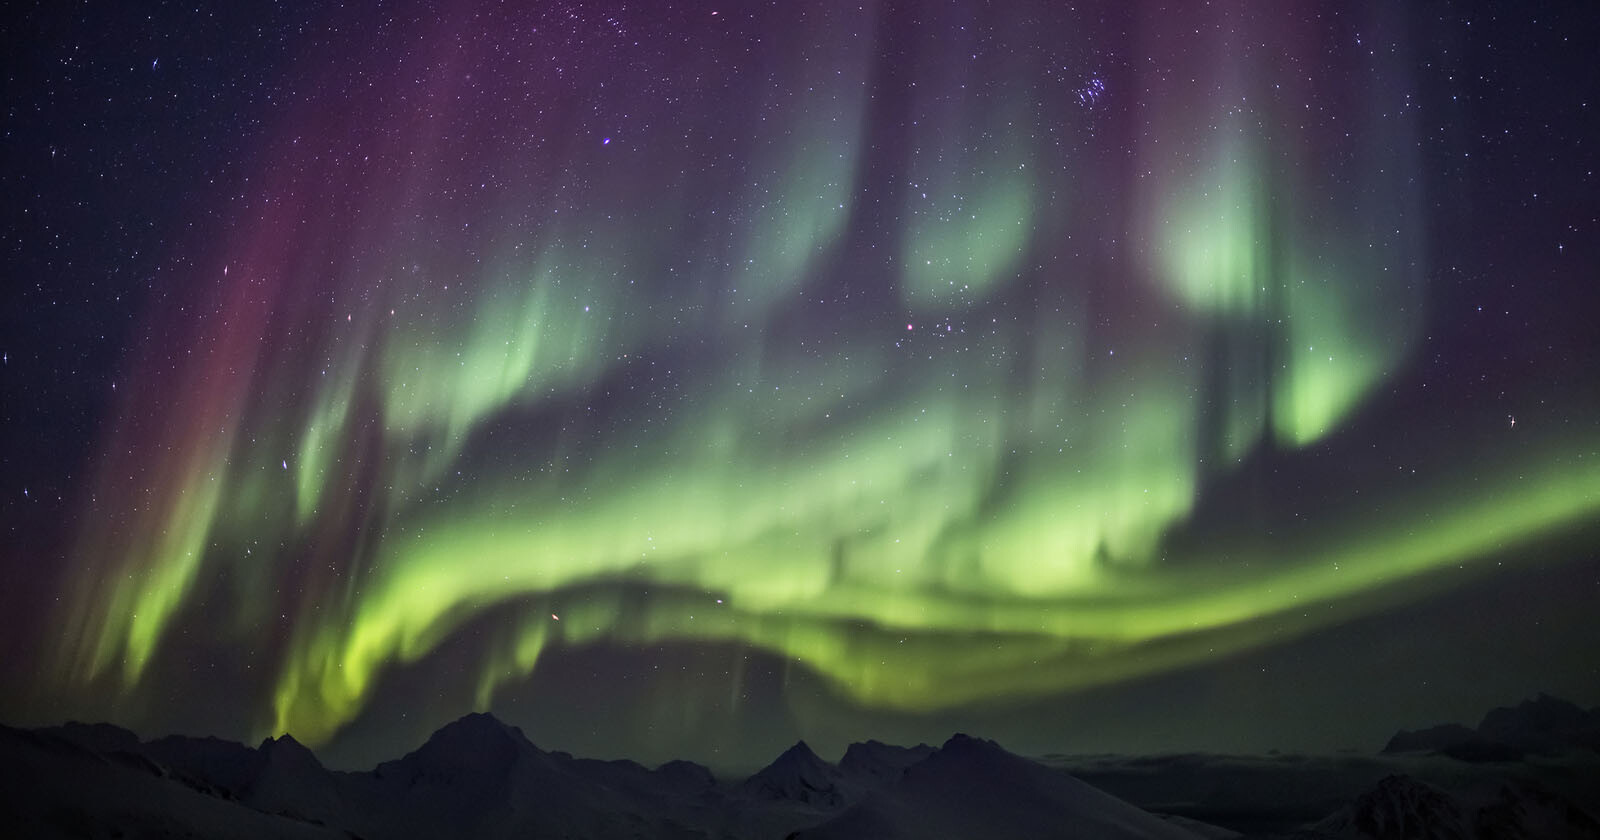 Photographers on Alert After Strong Aurora Lights Predicted This Week